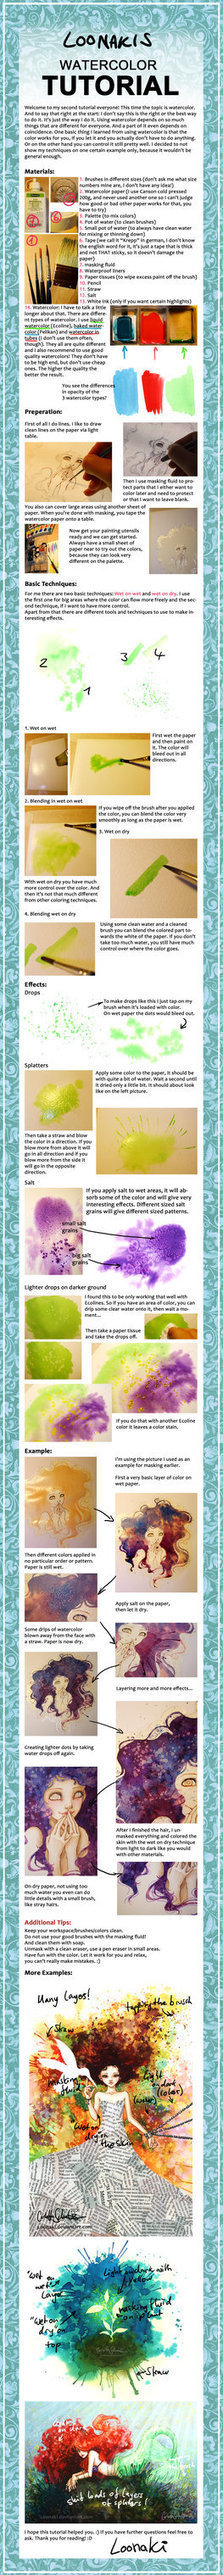 Watercolor Tutorial | Drawing References and Resources | Scoop.it